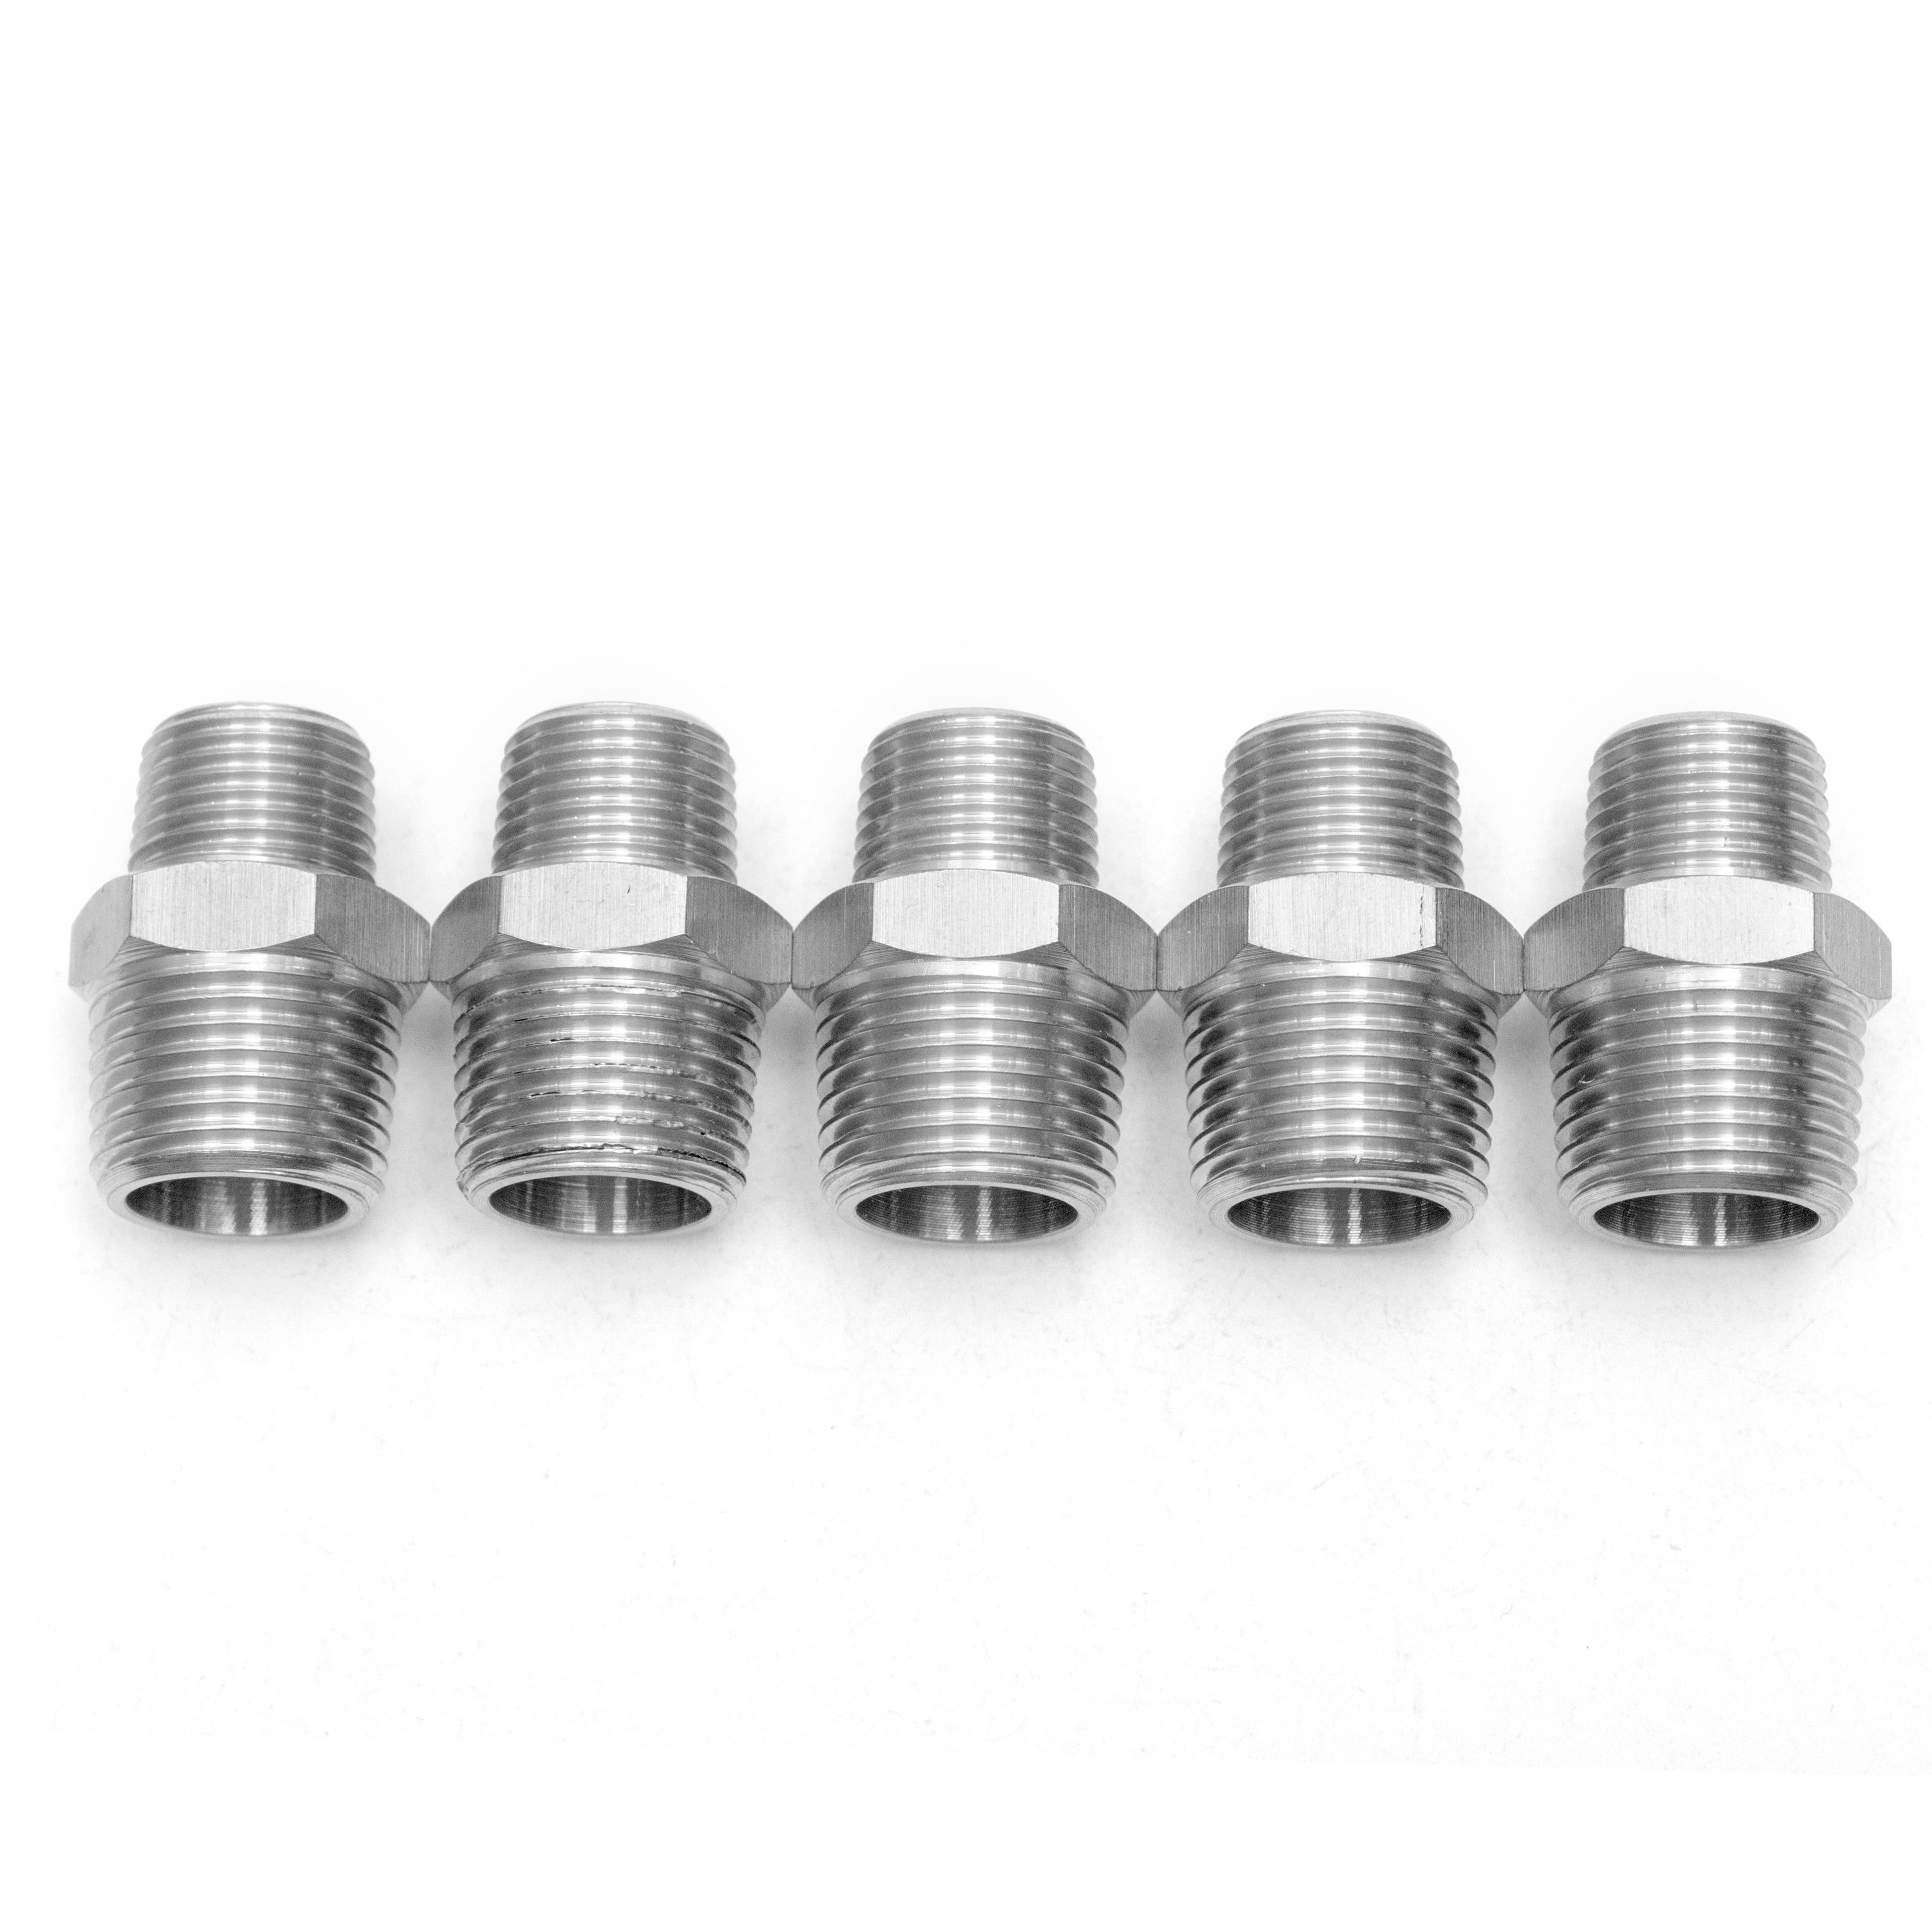 LTWFITTING Bar Production Stainless Steel 316 Pipe Hex Reducing Nipple Fitting 1/2 Inch x 3/8 Inch Male NPT Water Boat (Pack of 5)